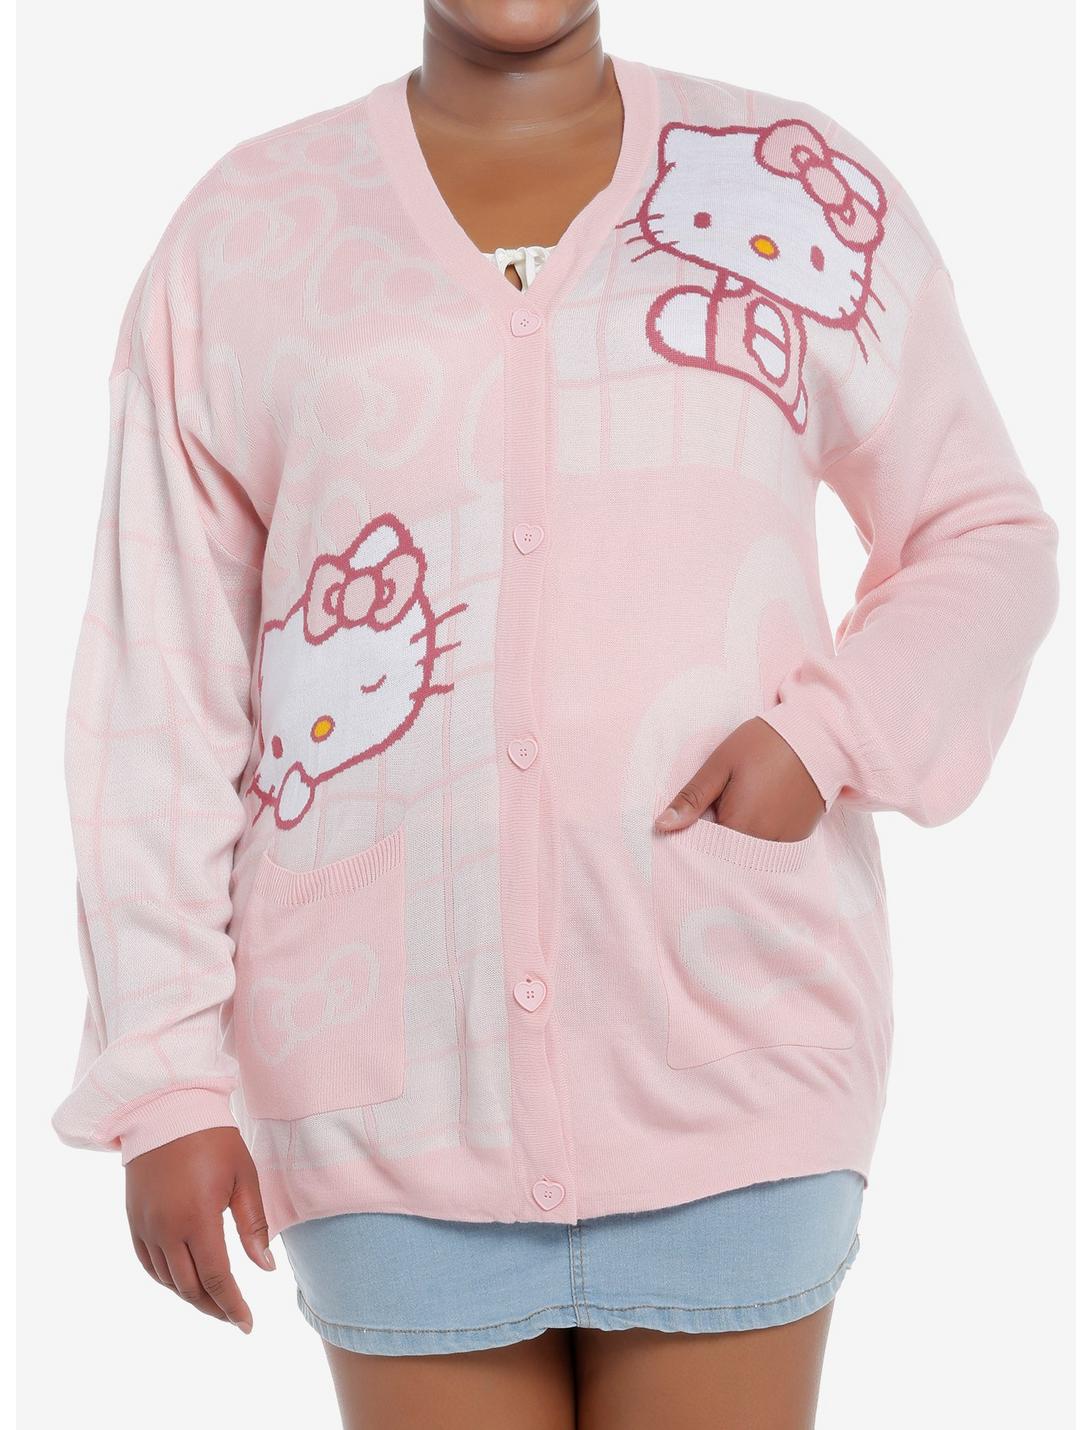 Hello Kitty Pink Grid Cardigan Plus Size, PINK, hi-res